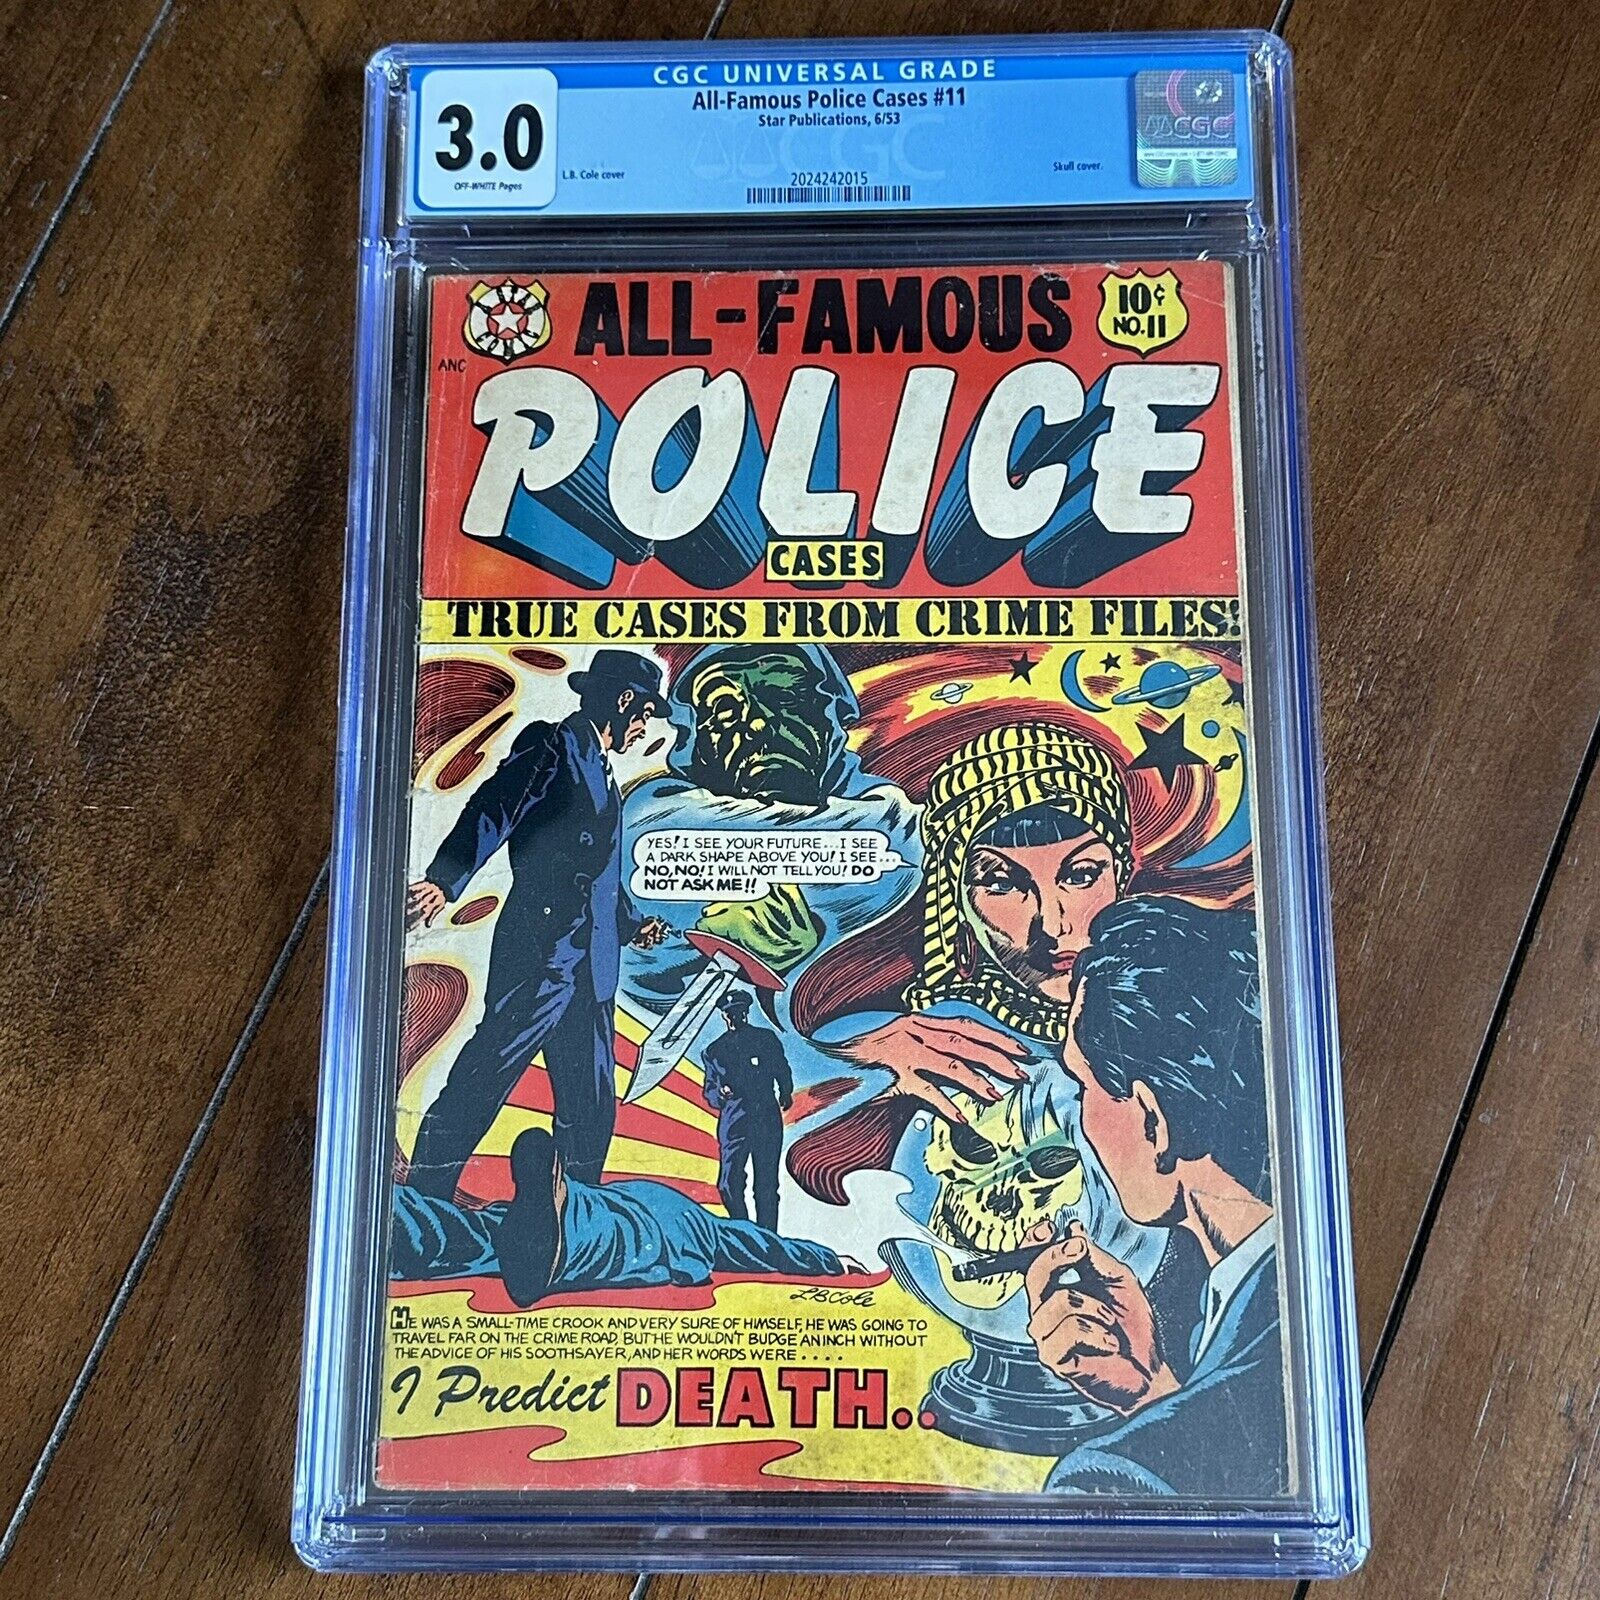 All-Famous Police Cases #11 (1953) - Skull Cover - CGC 3.0 - L.B. Cole